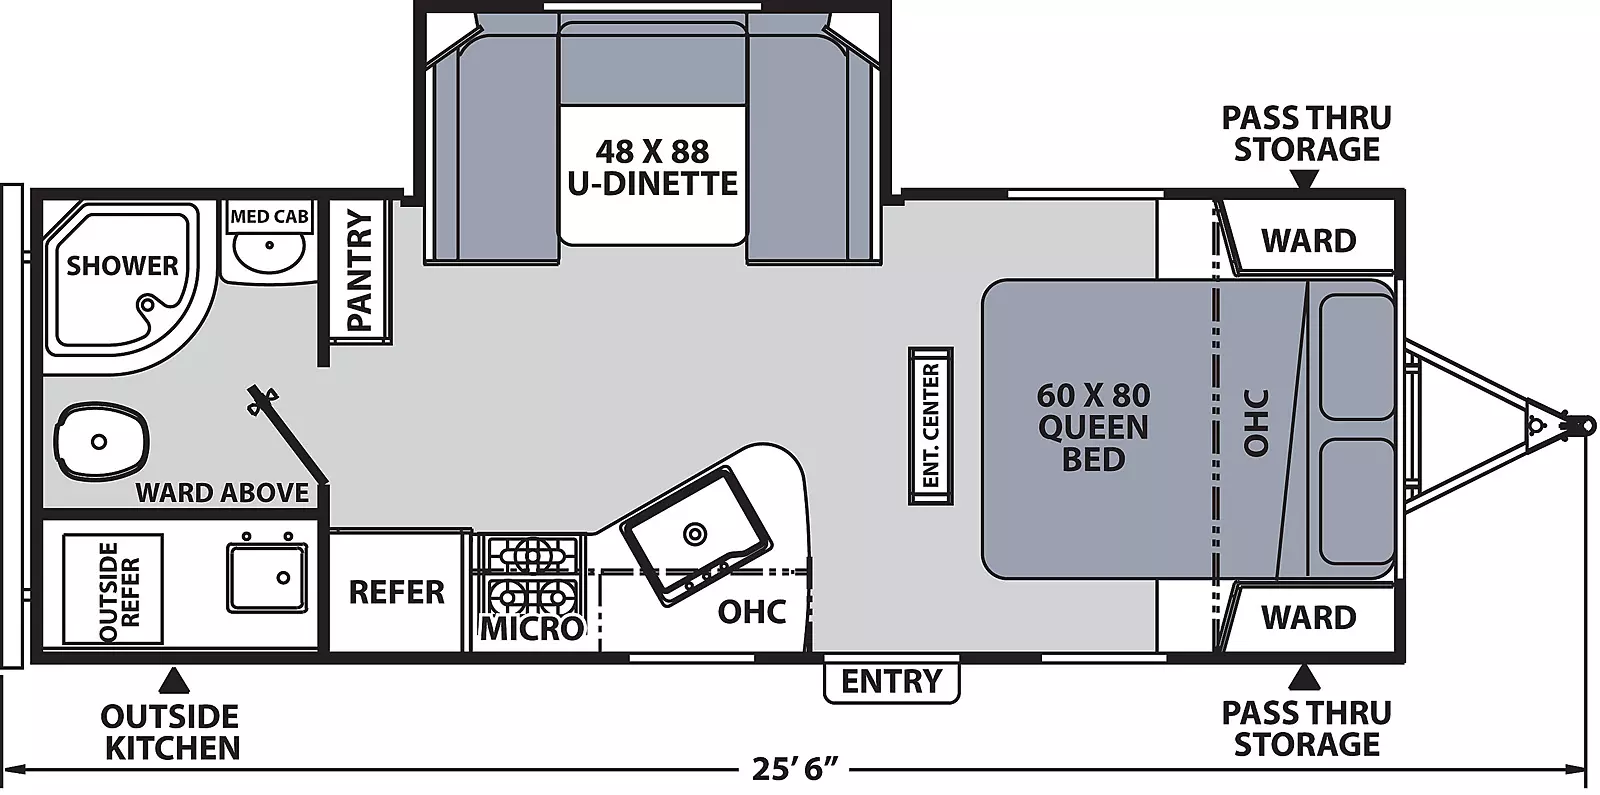 The 215RBK has one slide out on the off-door side and one entry door on the door side. Interior layout from front to back: front bedroom with foot facing queen bed, overhead cabinet, and wardrobes on either side of the bed; entertainment center; kitchen living dining area with off door side slide out containing u-dinette; door side kitchen containing sink, overhead cabinet, cook top stove, microwave cabinet, and refrigerator; pantry on off door side; and off-door side rear bathroom. Outside camp kitchen includes mini-refrigerator and single bowl sink on door side.